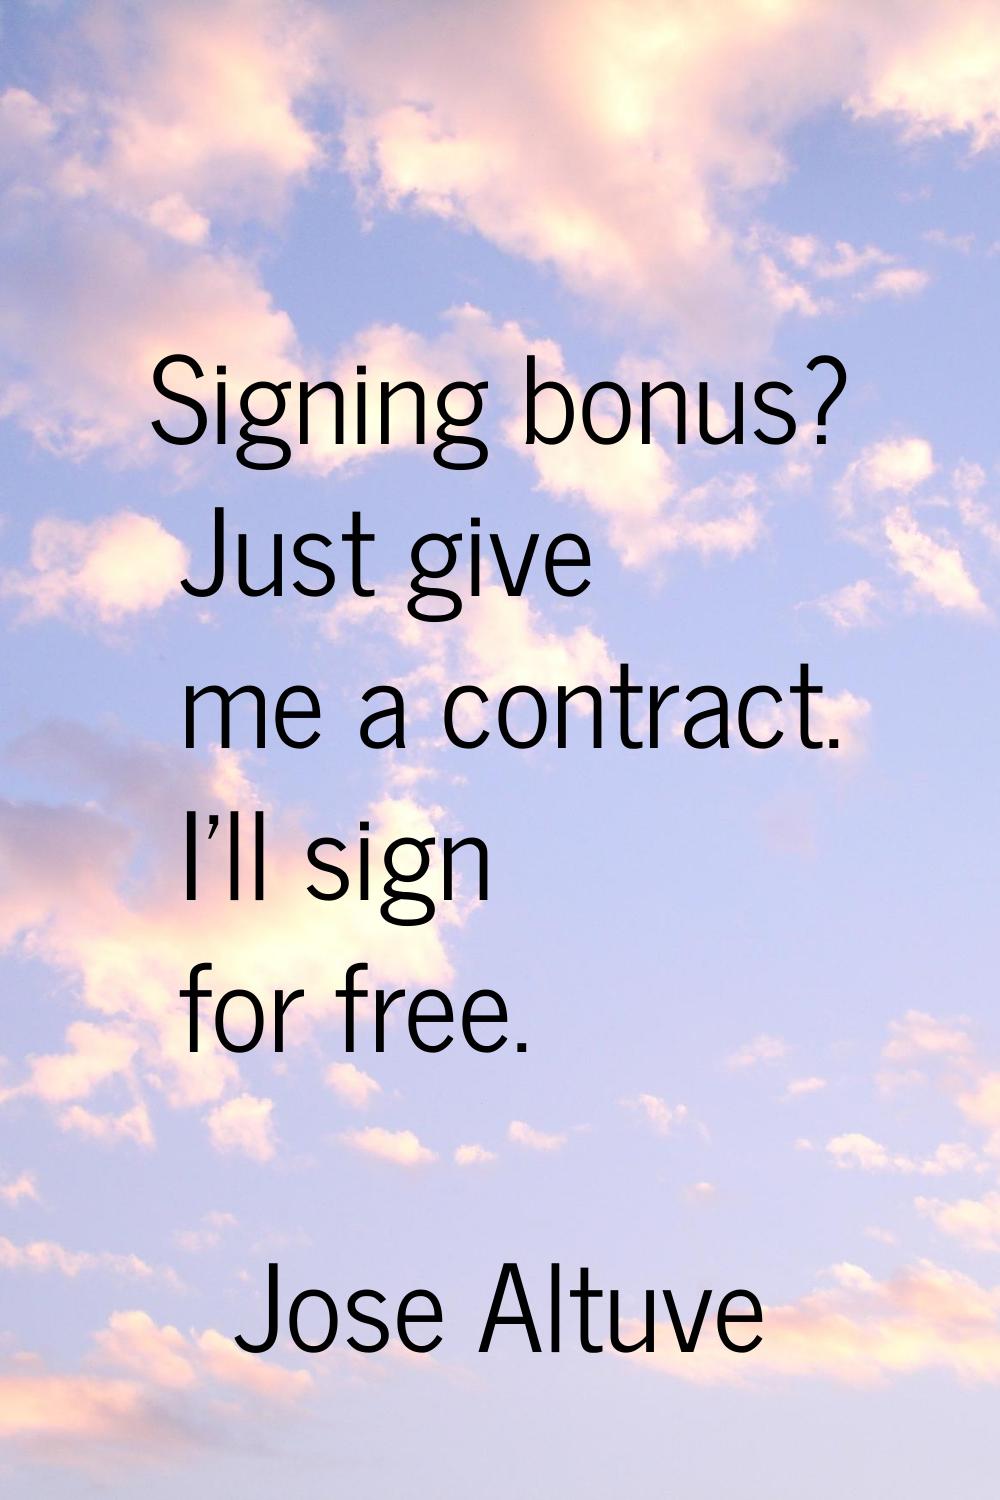 Signing bonus? Just give me a contract. I'll sign for free.